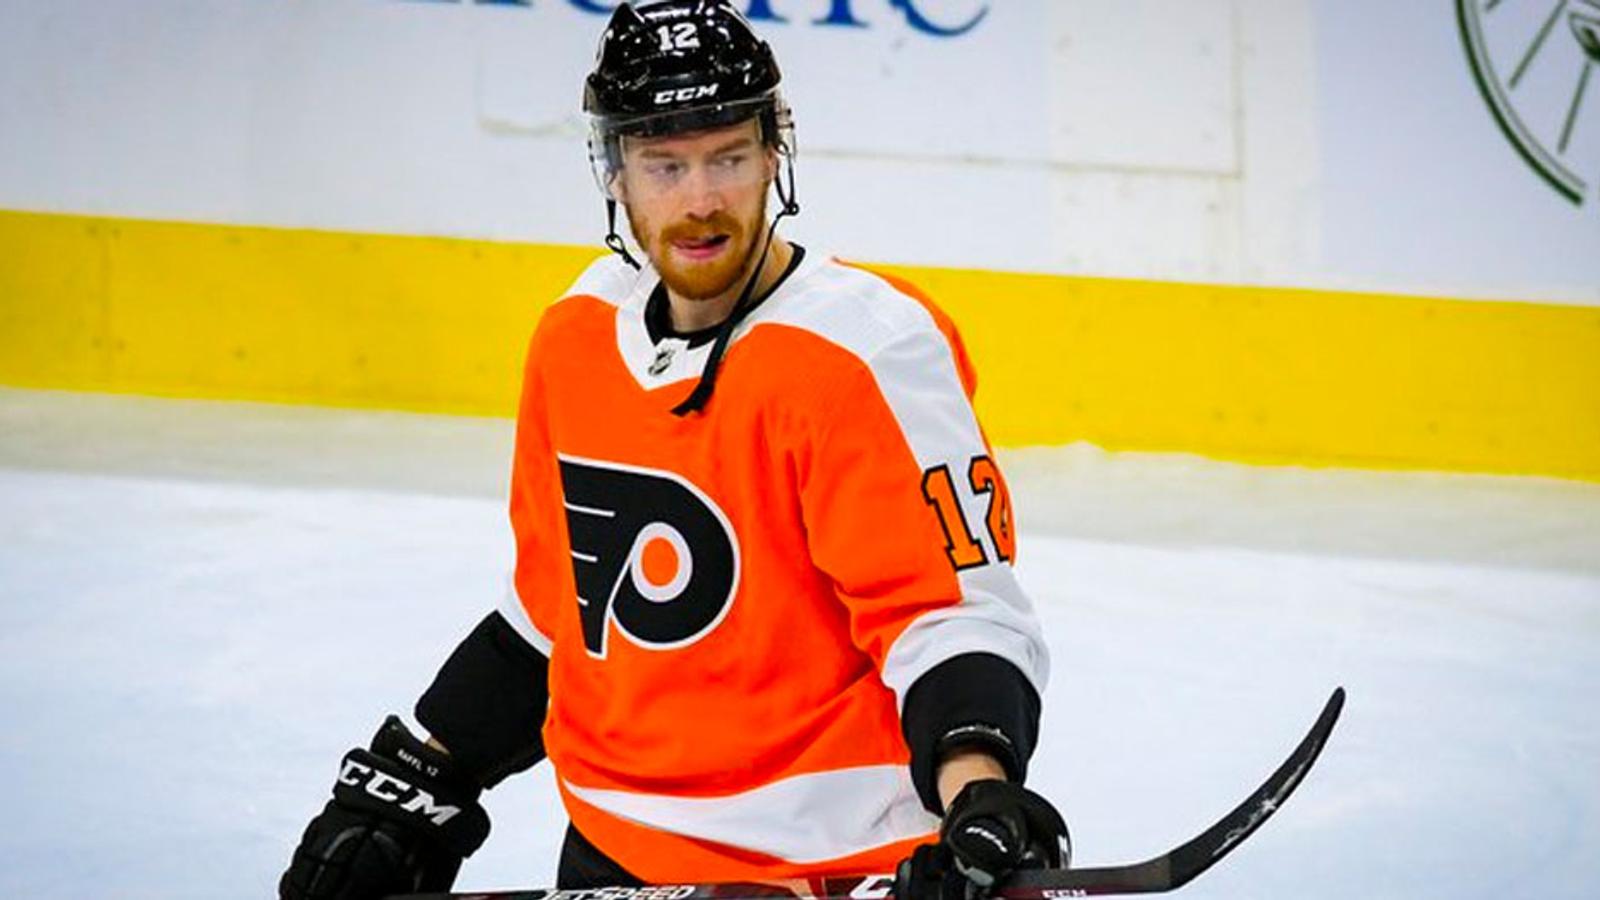 Former Stars, Capitals and Flyers forward Raffl gives up on his NHL career